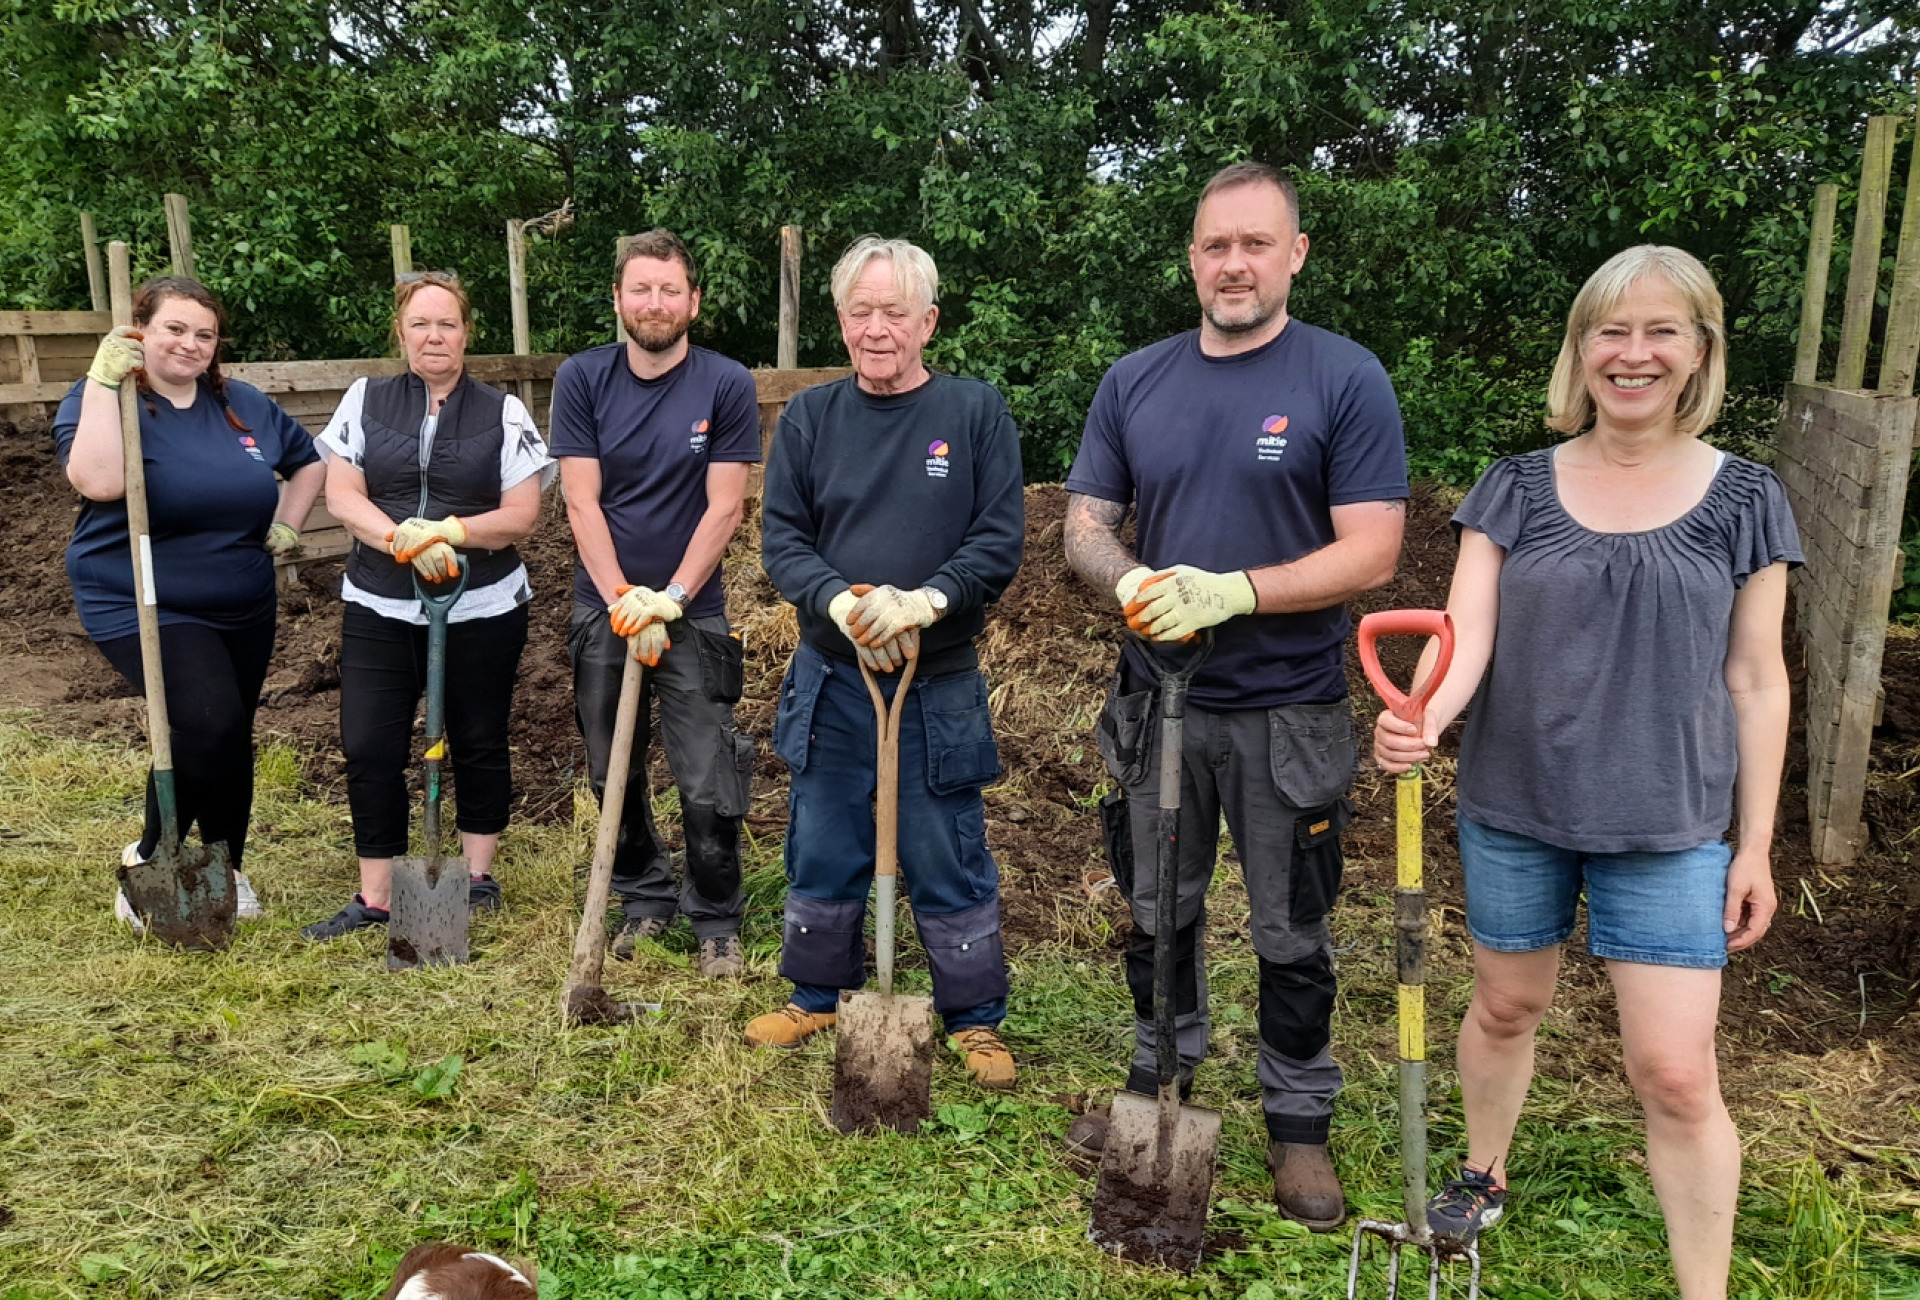 The Mitie team digging at the Farm